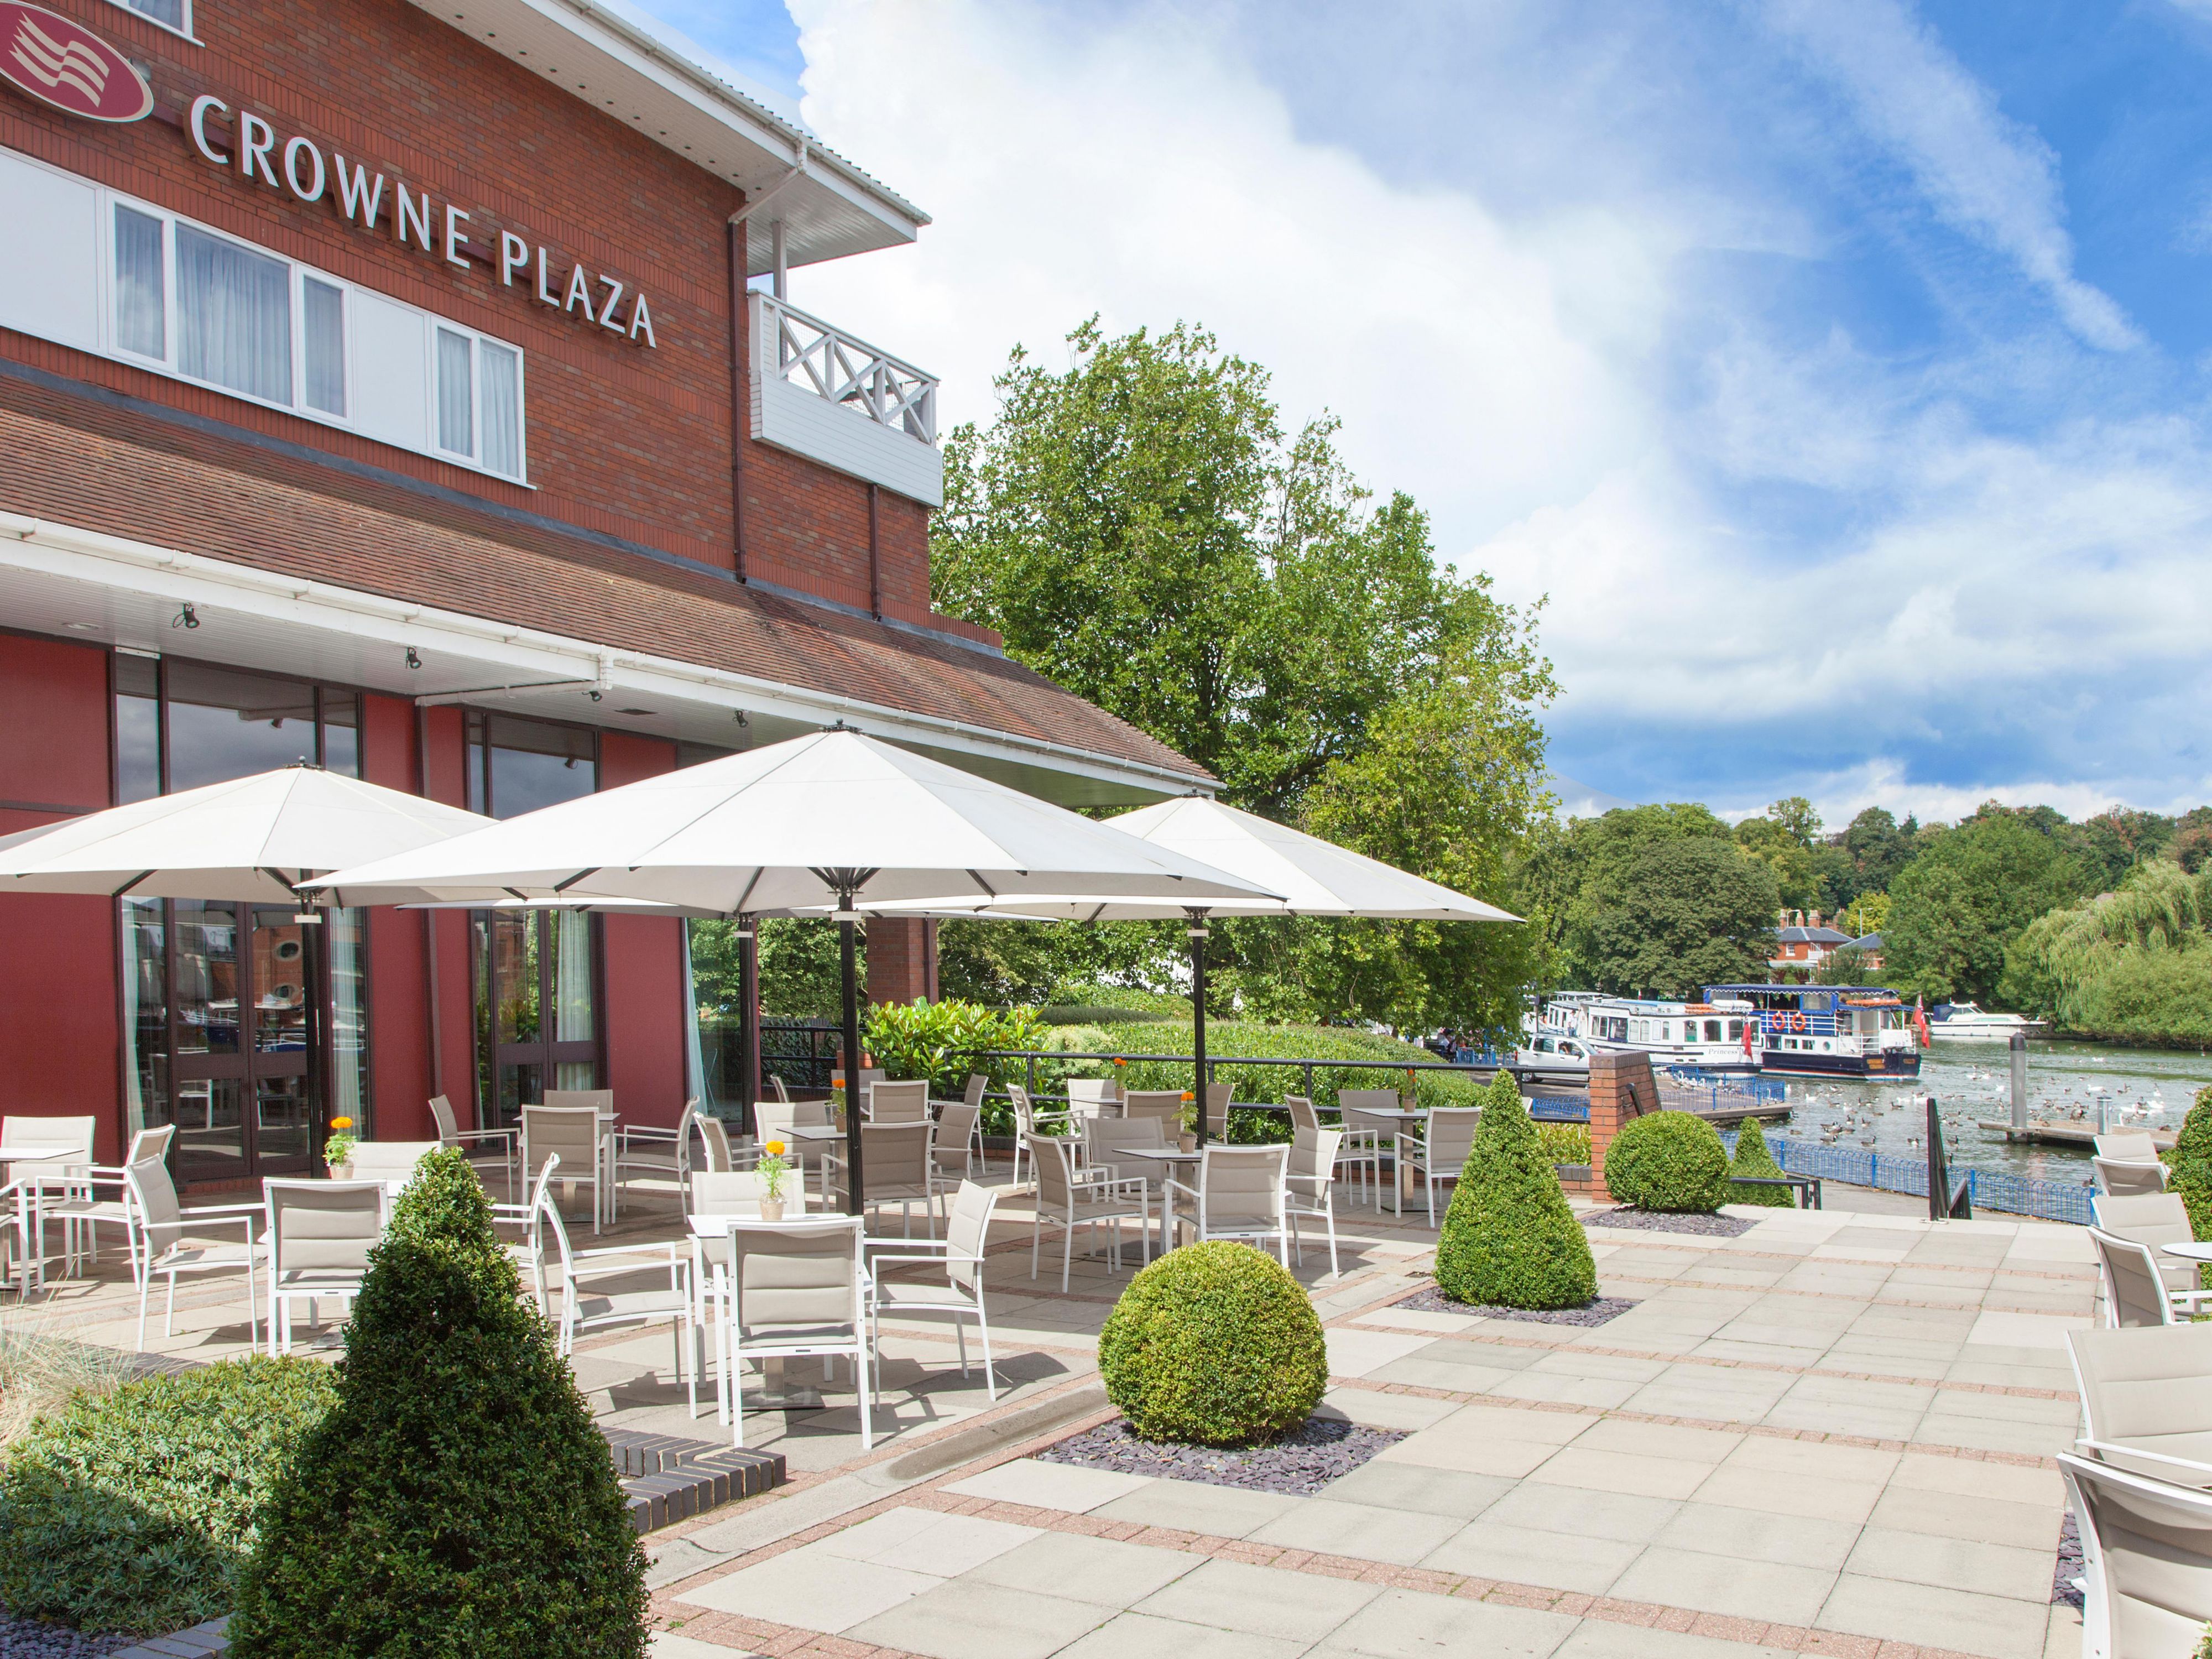 The Riverside Terrace is the ideal place to eat, drink, meet with friends and simply sit back, relax and enjoying the beautiful views of the River Thames.